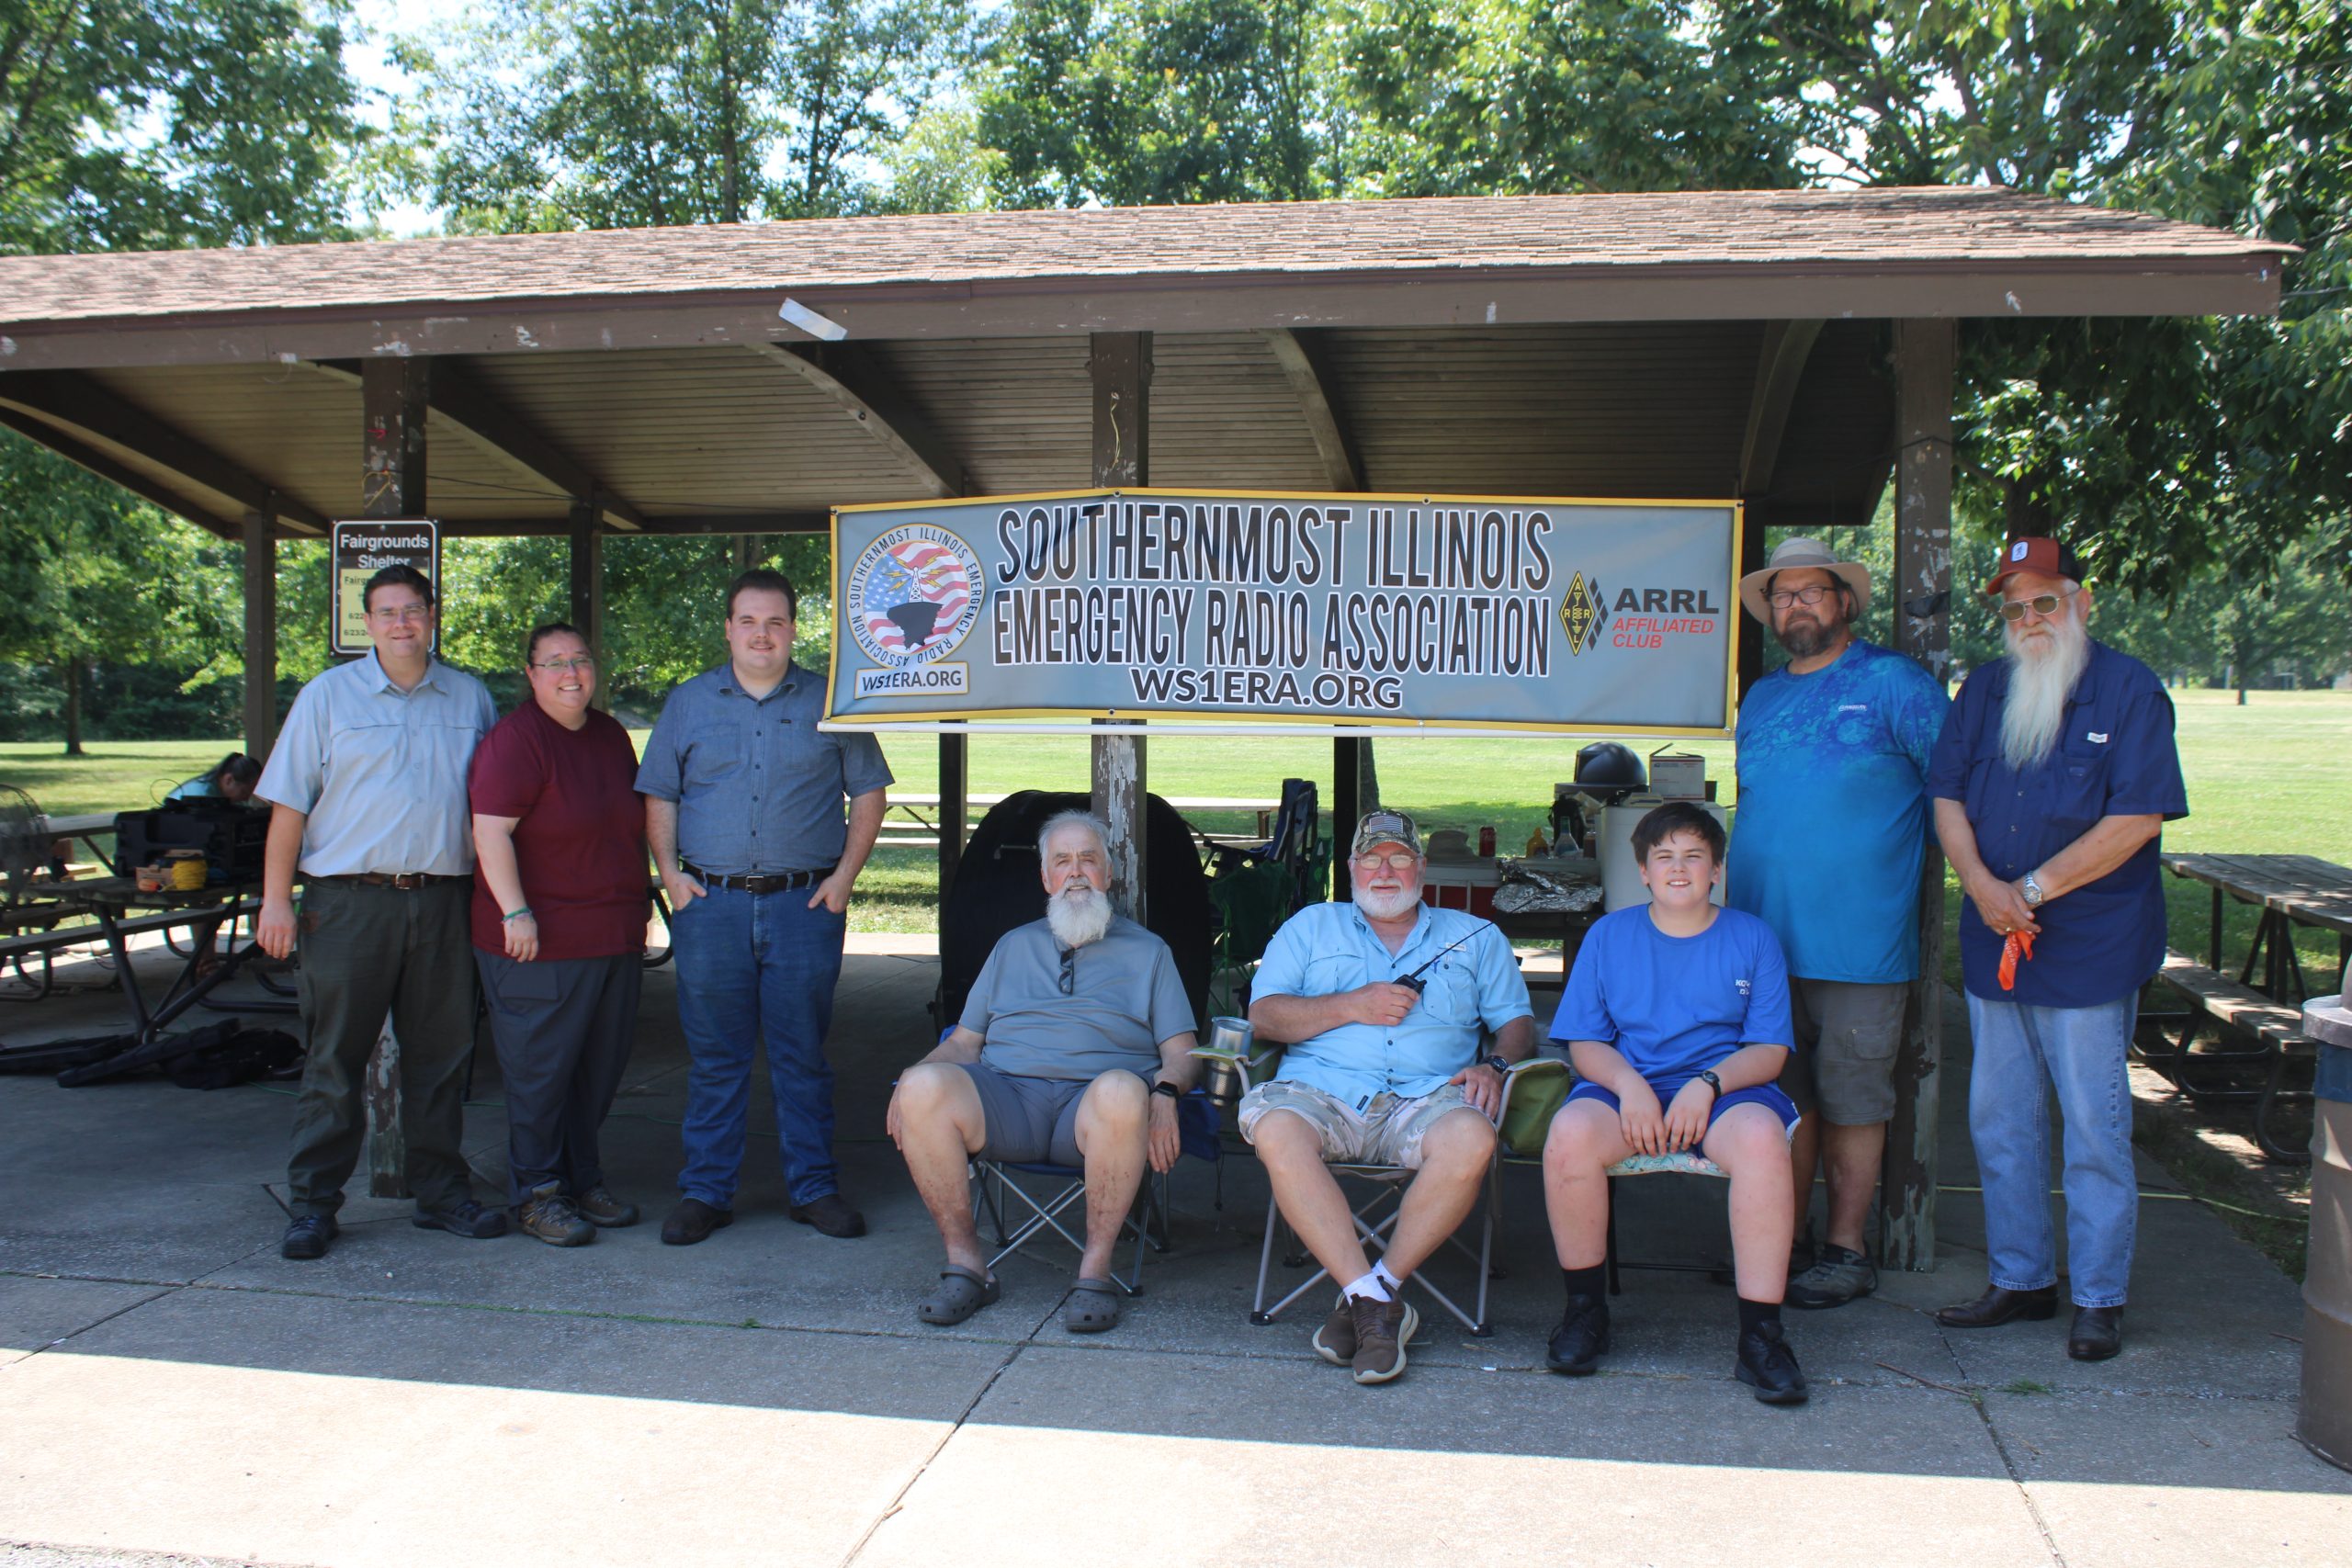 Members of the Southernmost Illinois Emergency Radio Association gathered Saturday at Fort Massac State Park in Metropolis, Illinois, to celebrate the American Radio Relay League’s Summer Field Day. (Photo by Shelley Byrne)